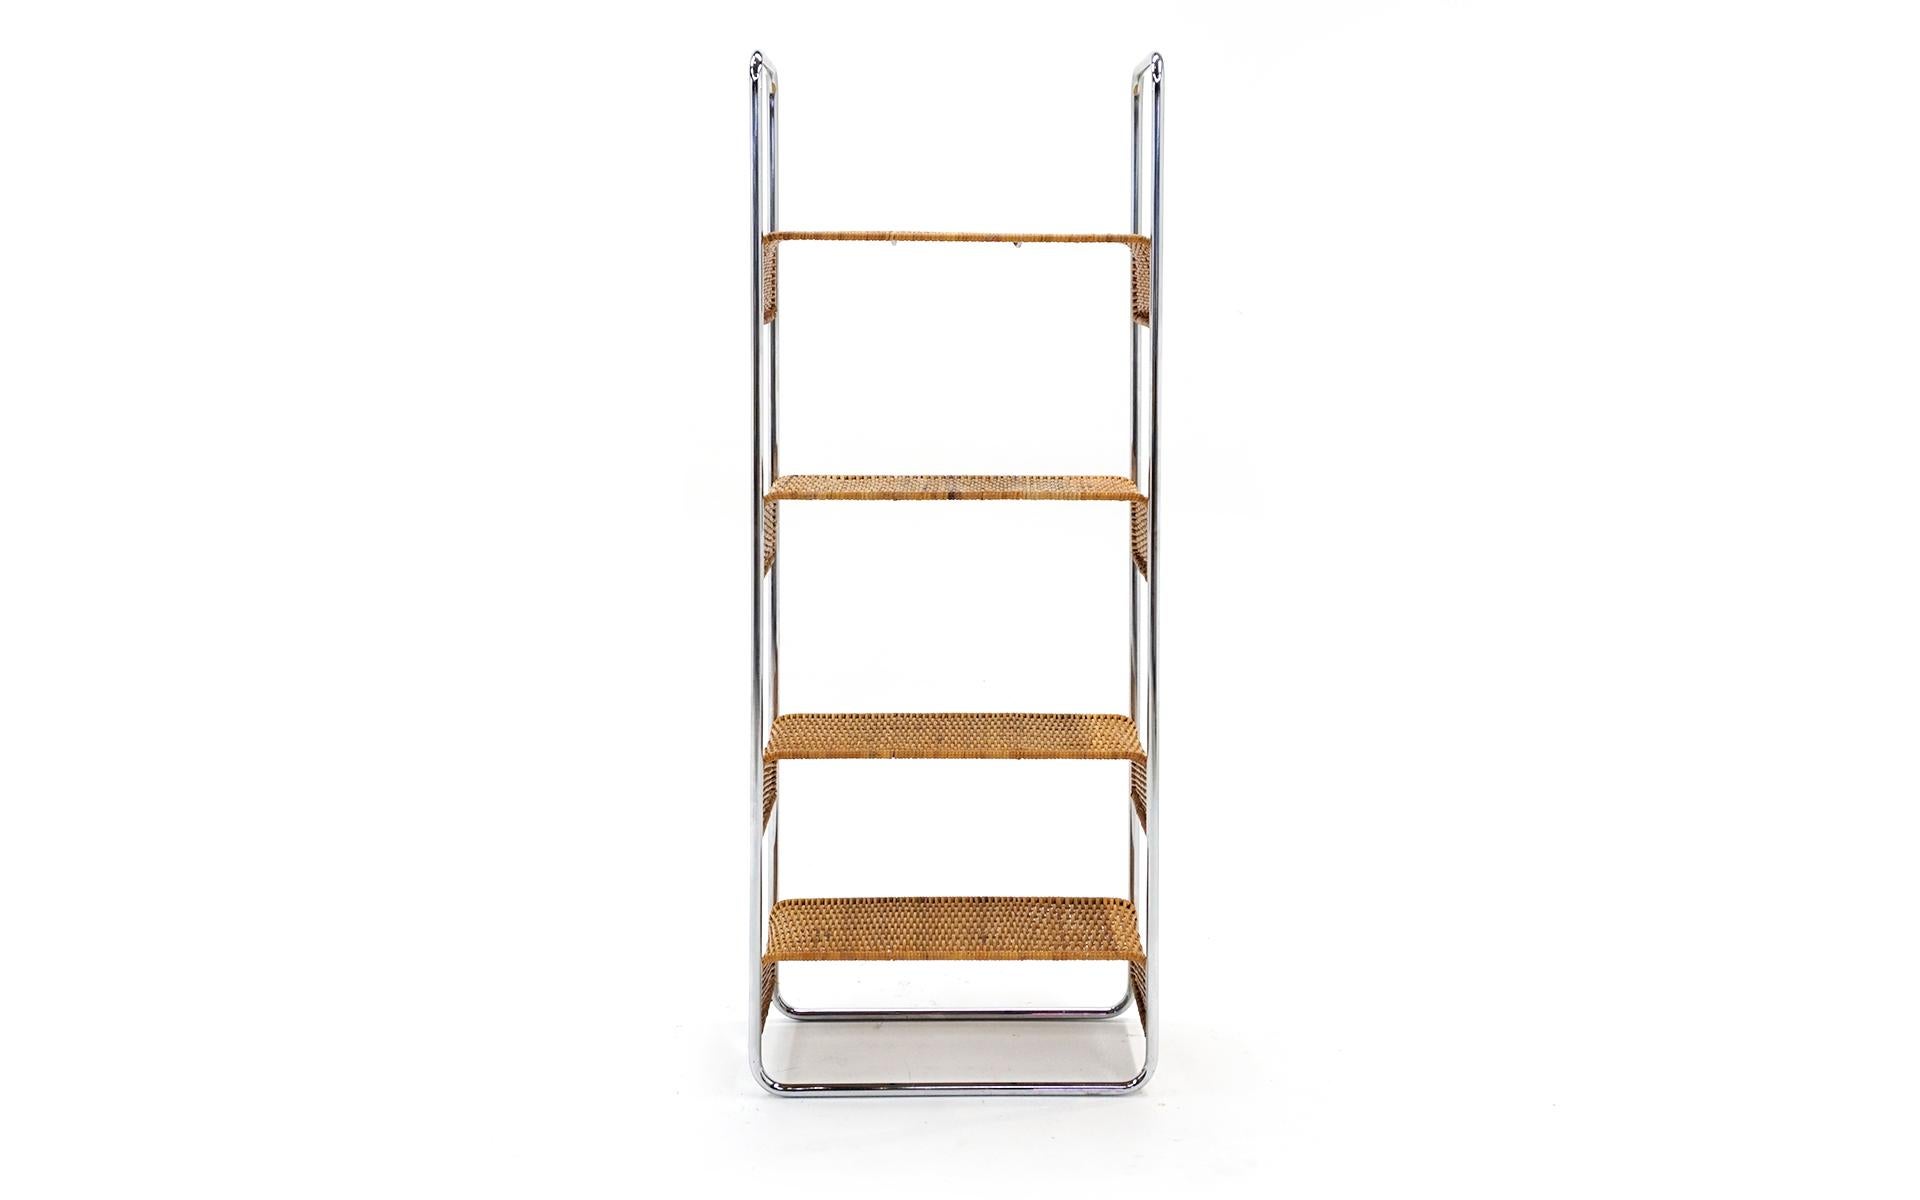 The wicker shelves are removable from the tubular chrome making this easy to transport. This would make a great storage piece in any number of places in a home. No breaks in the wicker. Some minor signs of wear to the tubular chrome. Ready to use.